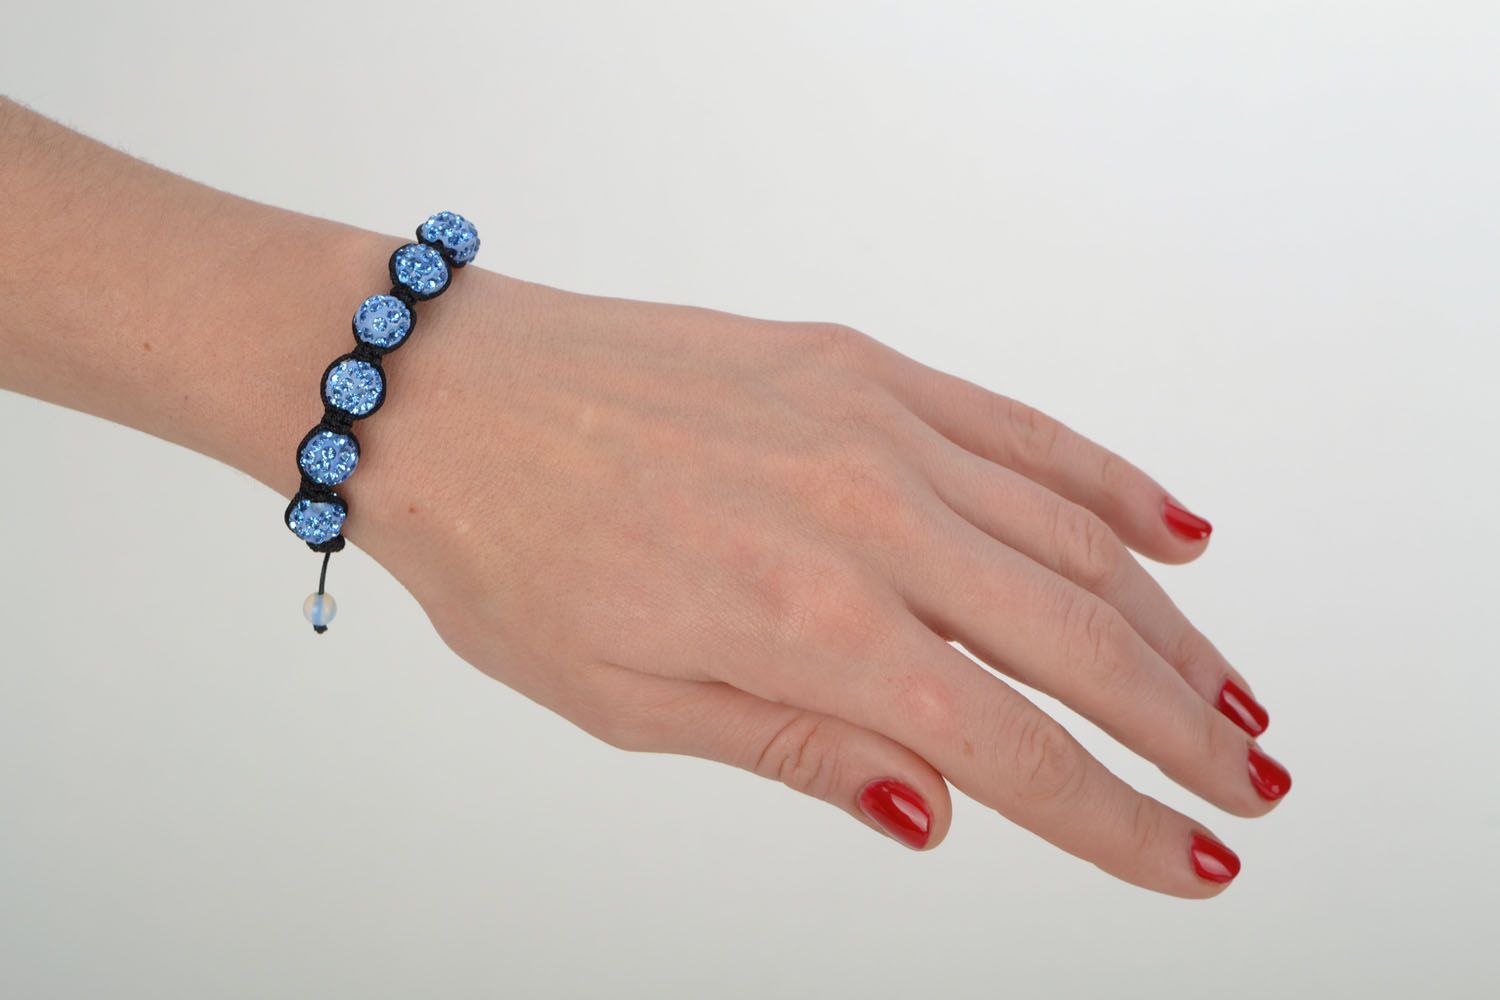 Bracelet made of blue beads and cord photo 1